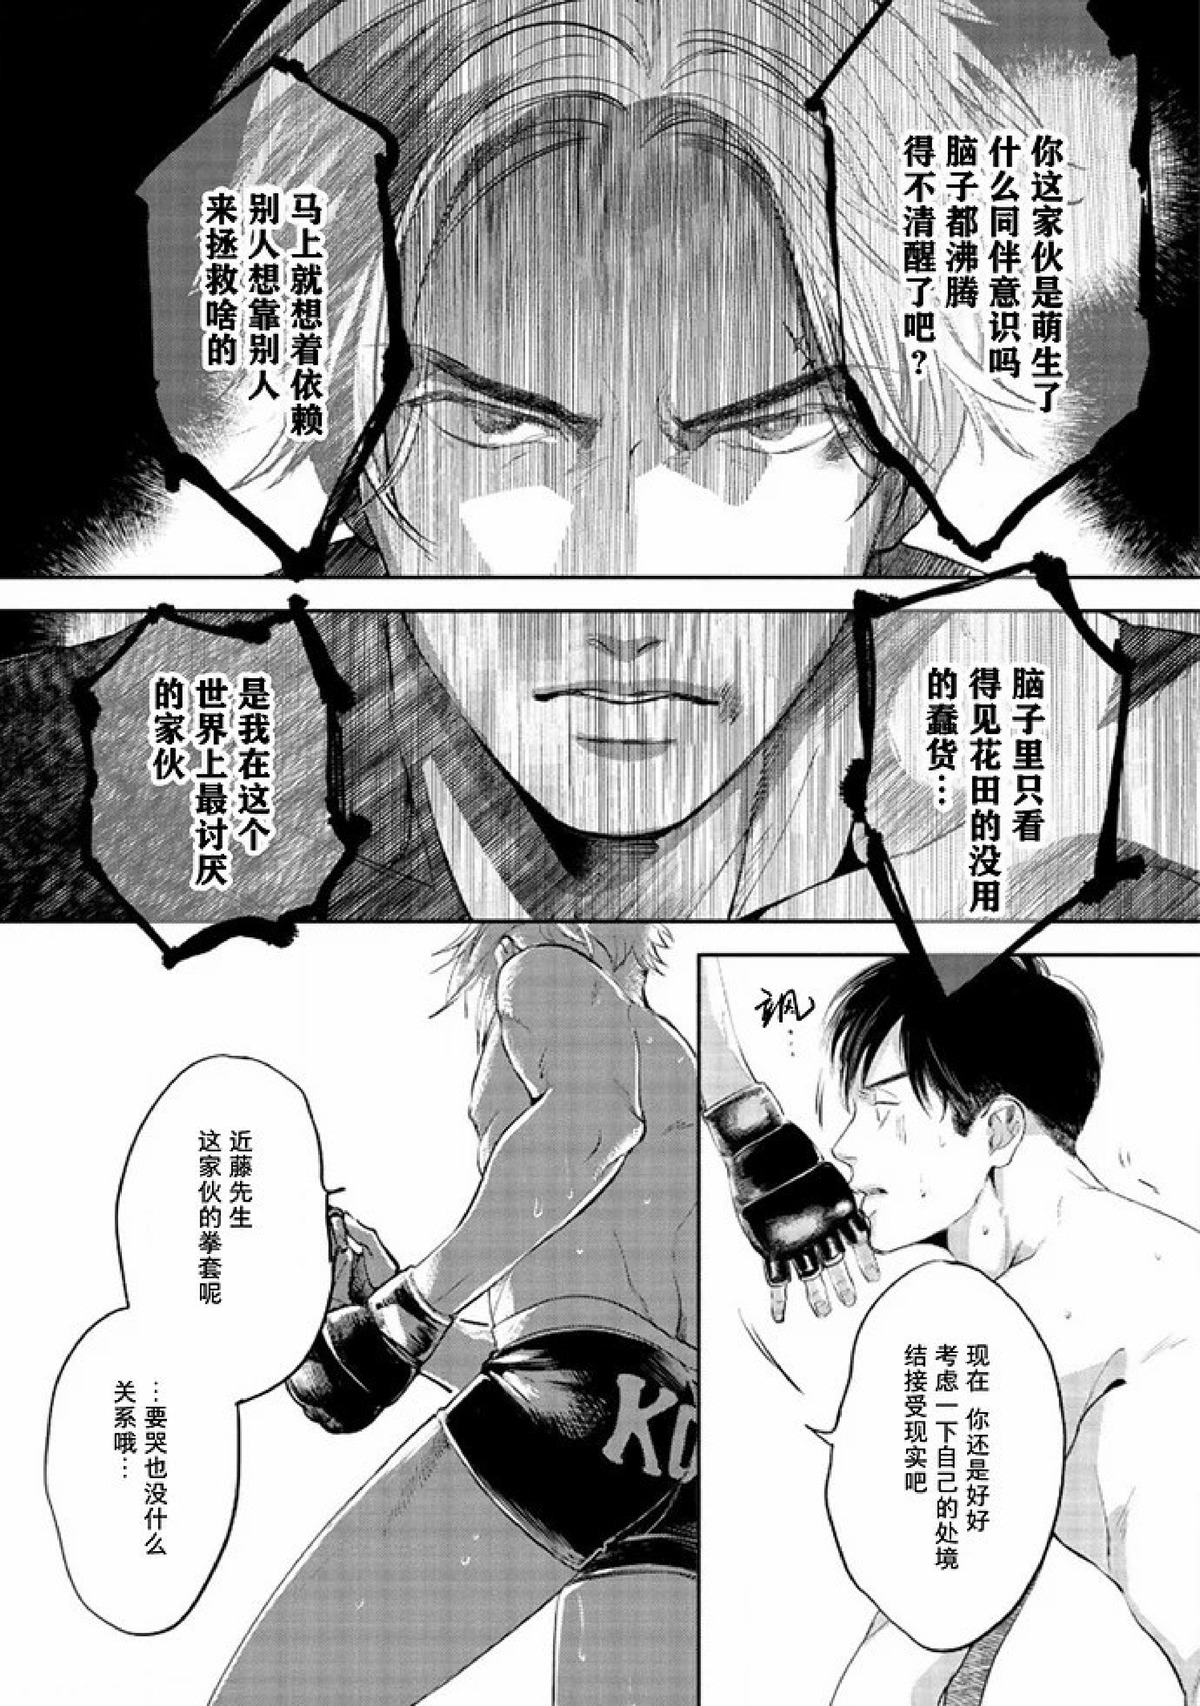 【Two sides of the same coin[腐漫]】漫画-（上卷01-02）章节漫画下拉式图片-64.jpg